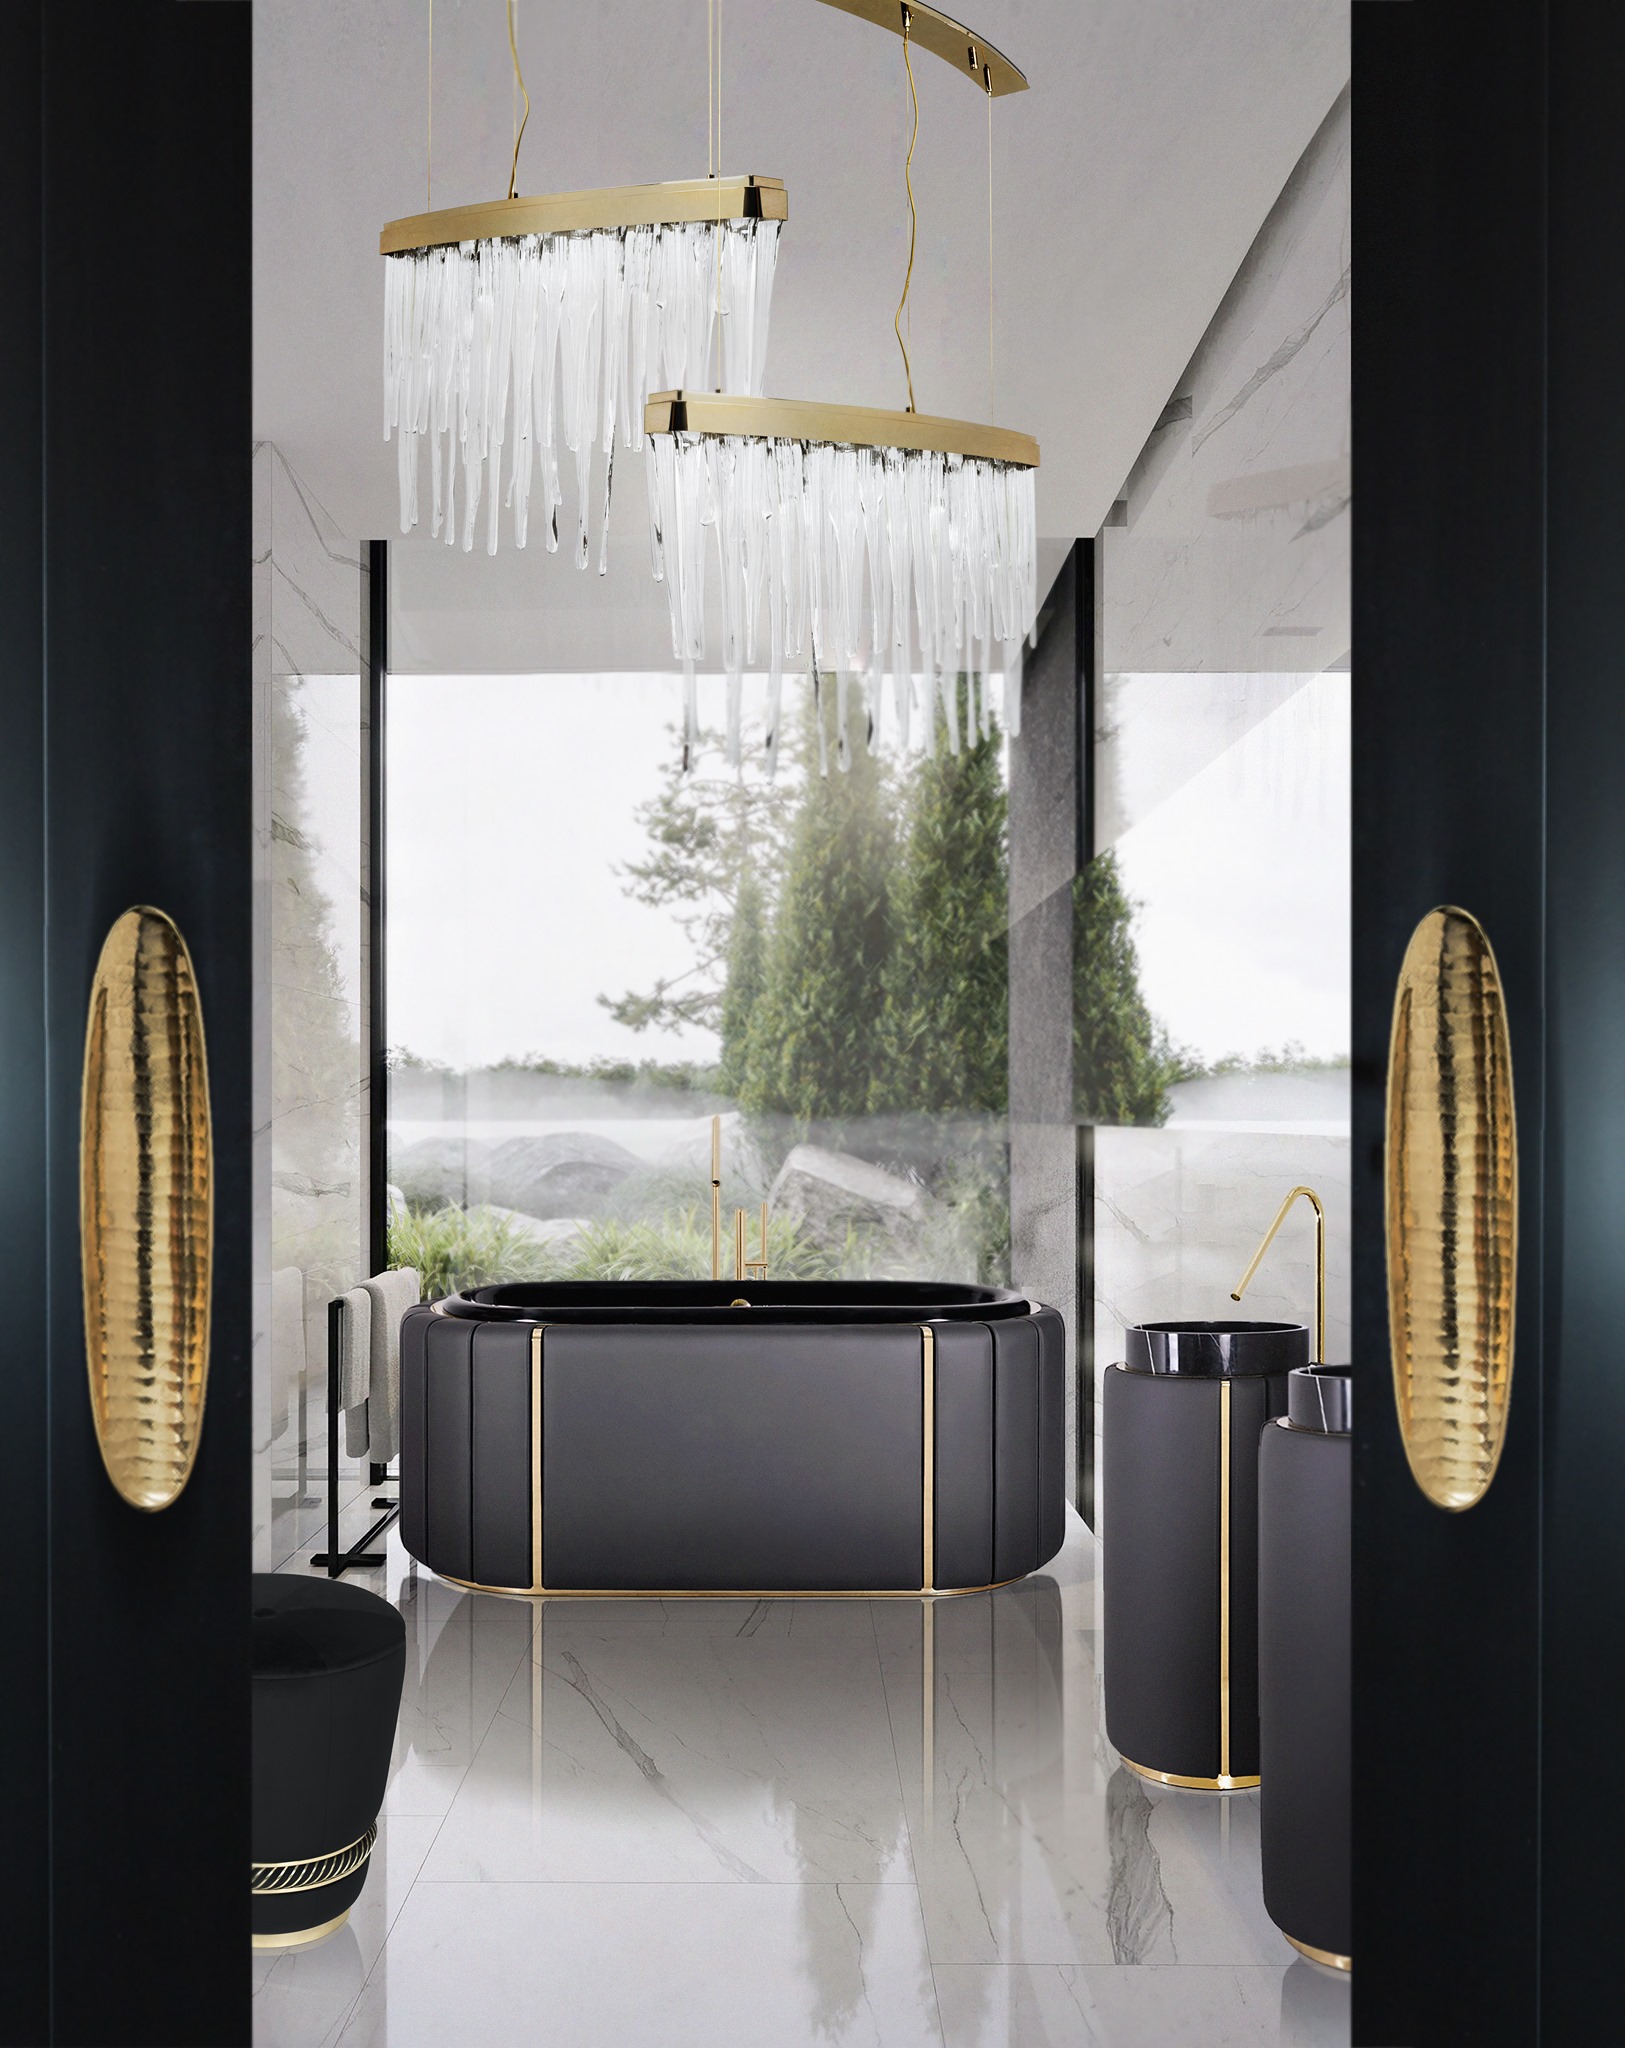 Entryway for one of the amazing bathrooms of this article, with black doors and gold door pull kano